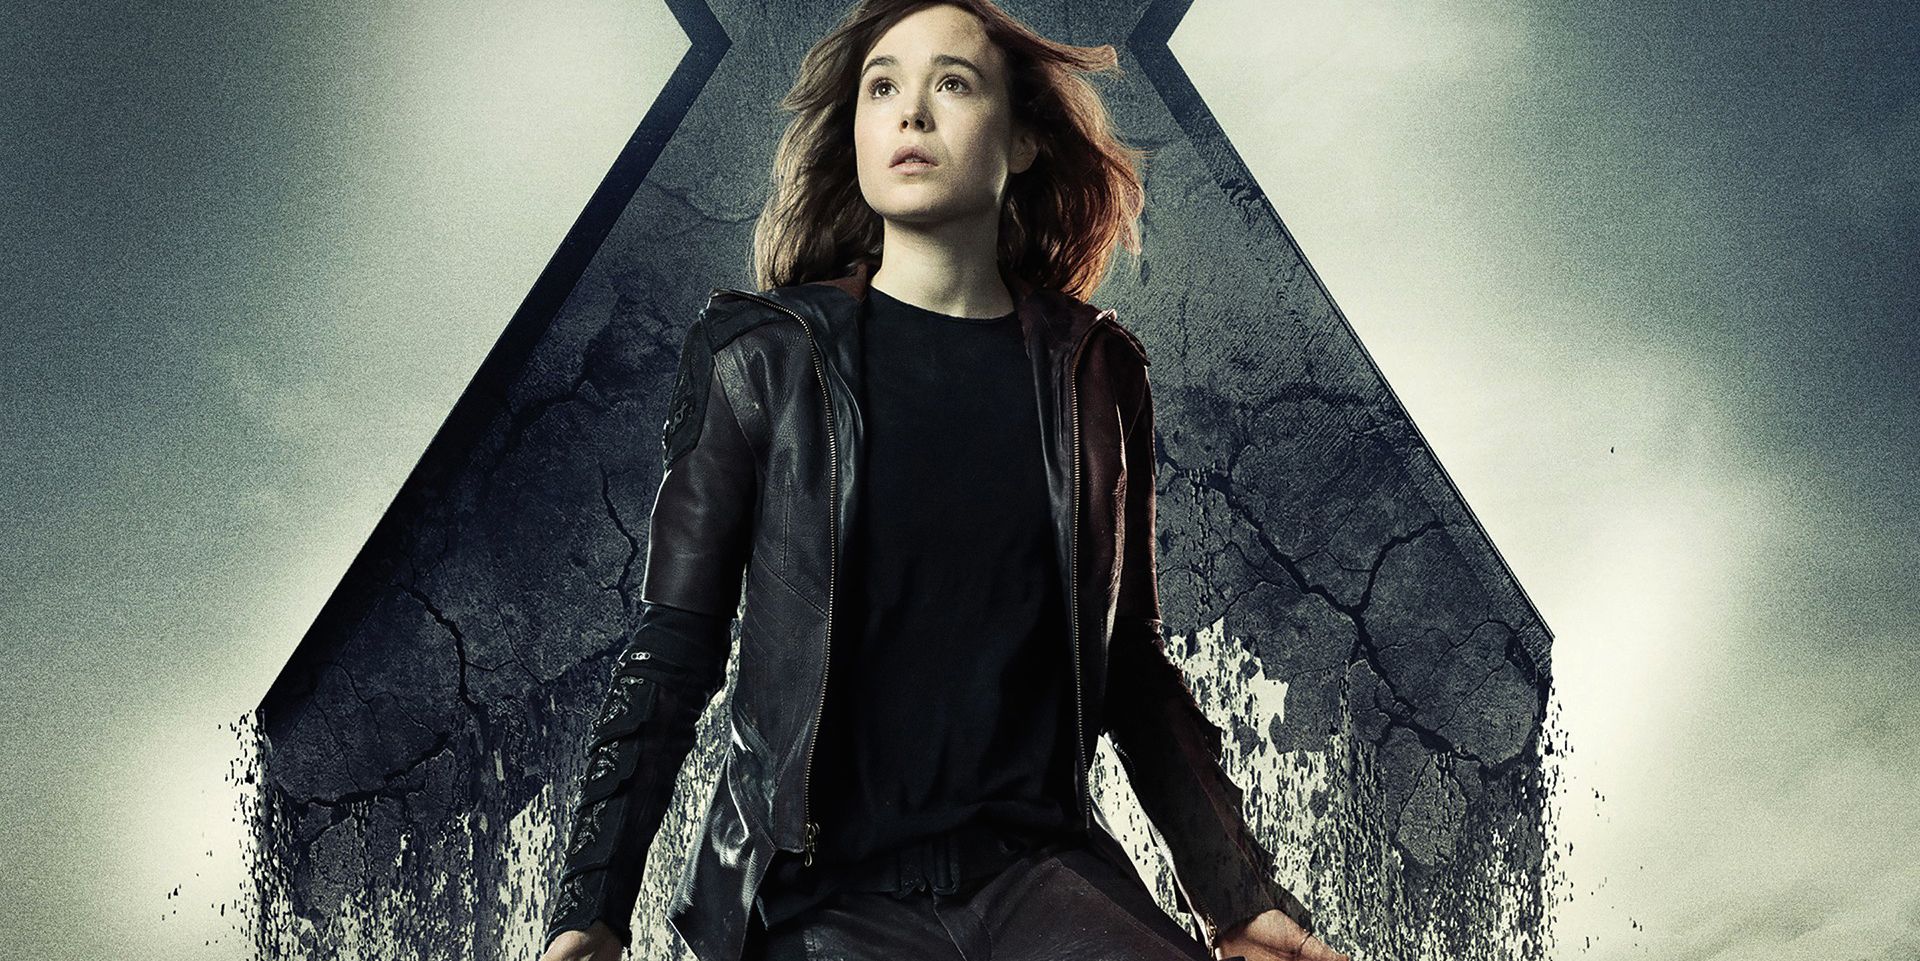 Kitty Pryde in X-Men Days of Future Past